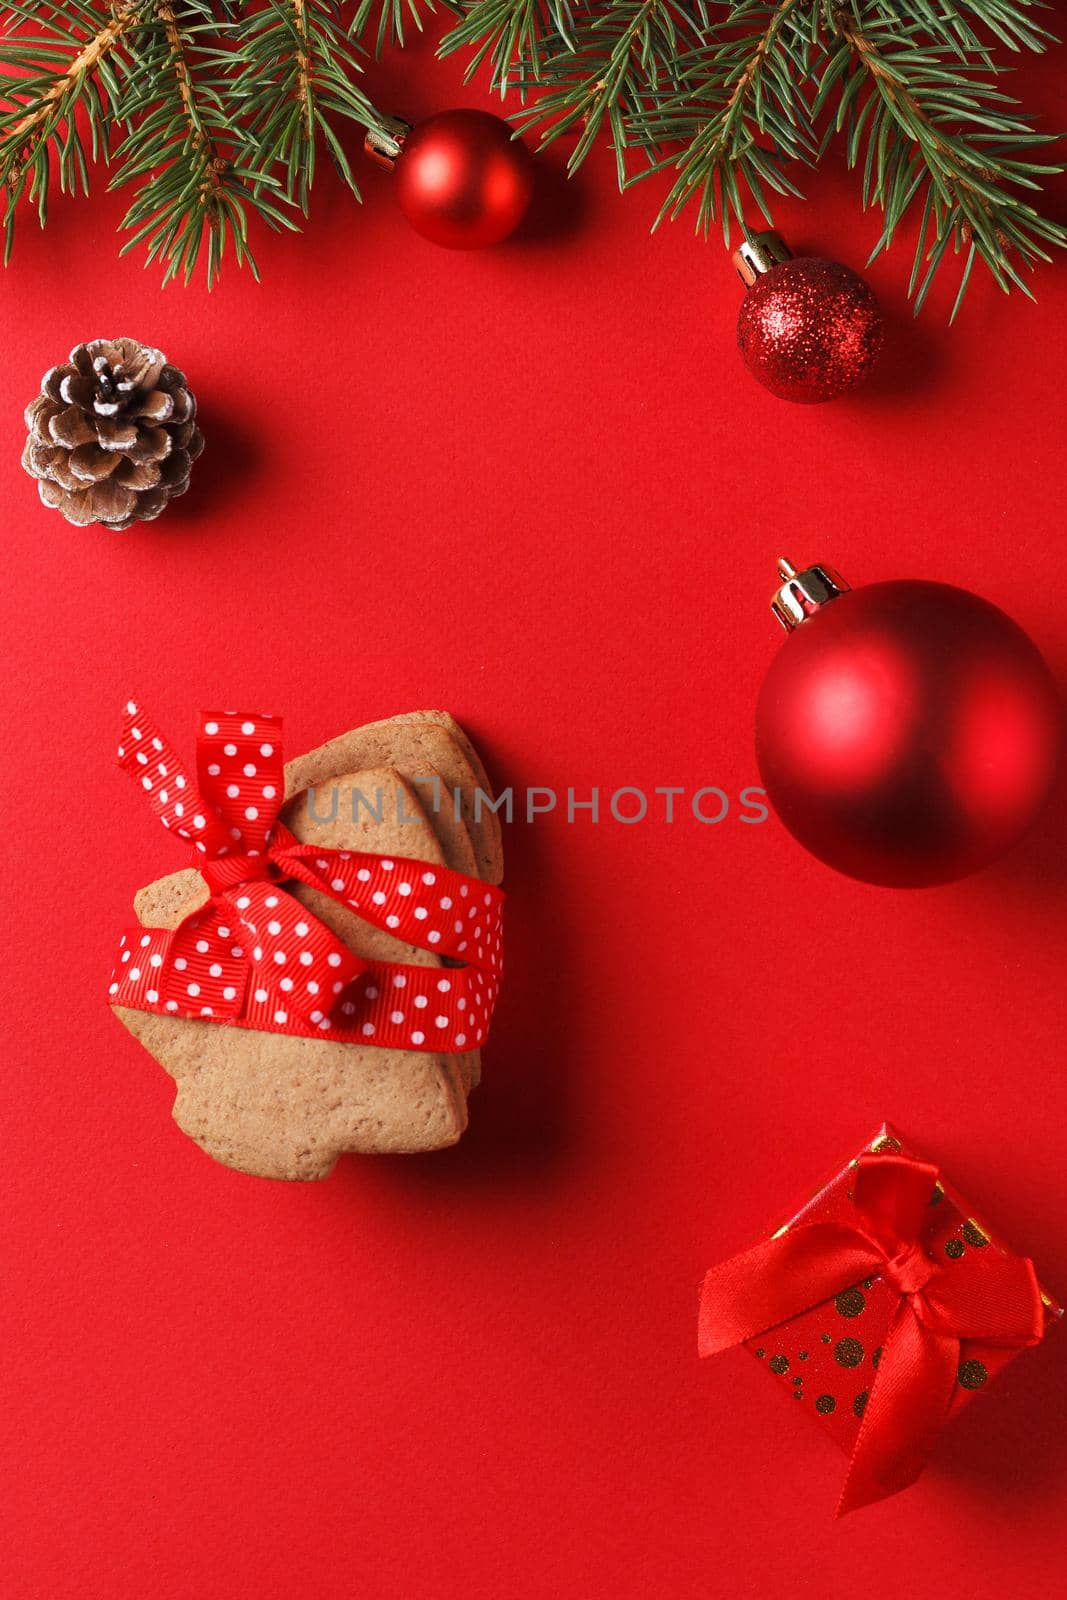 Delicious gingerbread and Christmas decor on a red background.